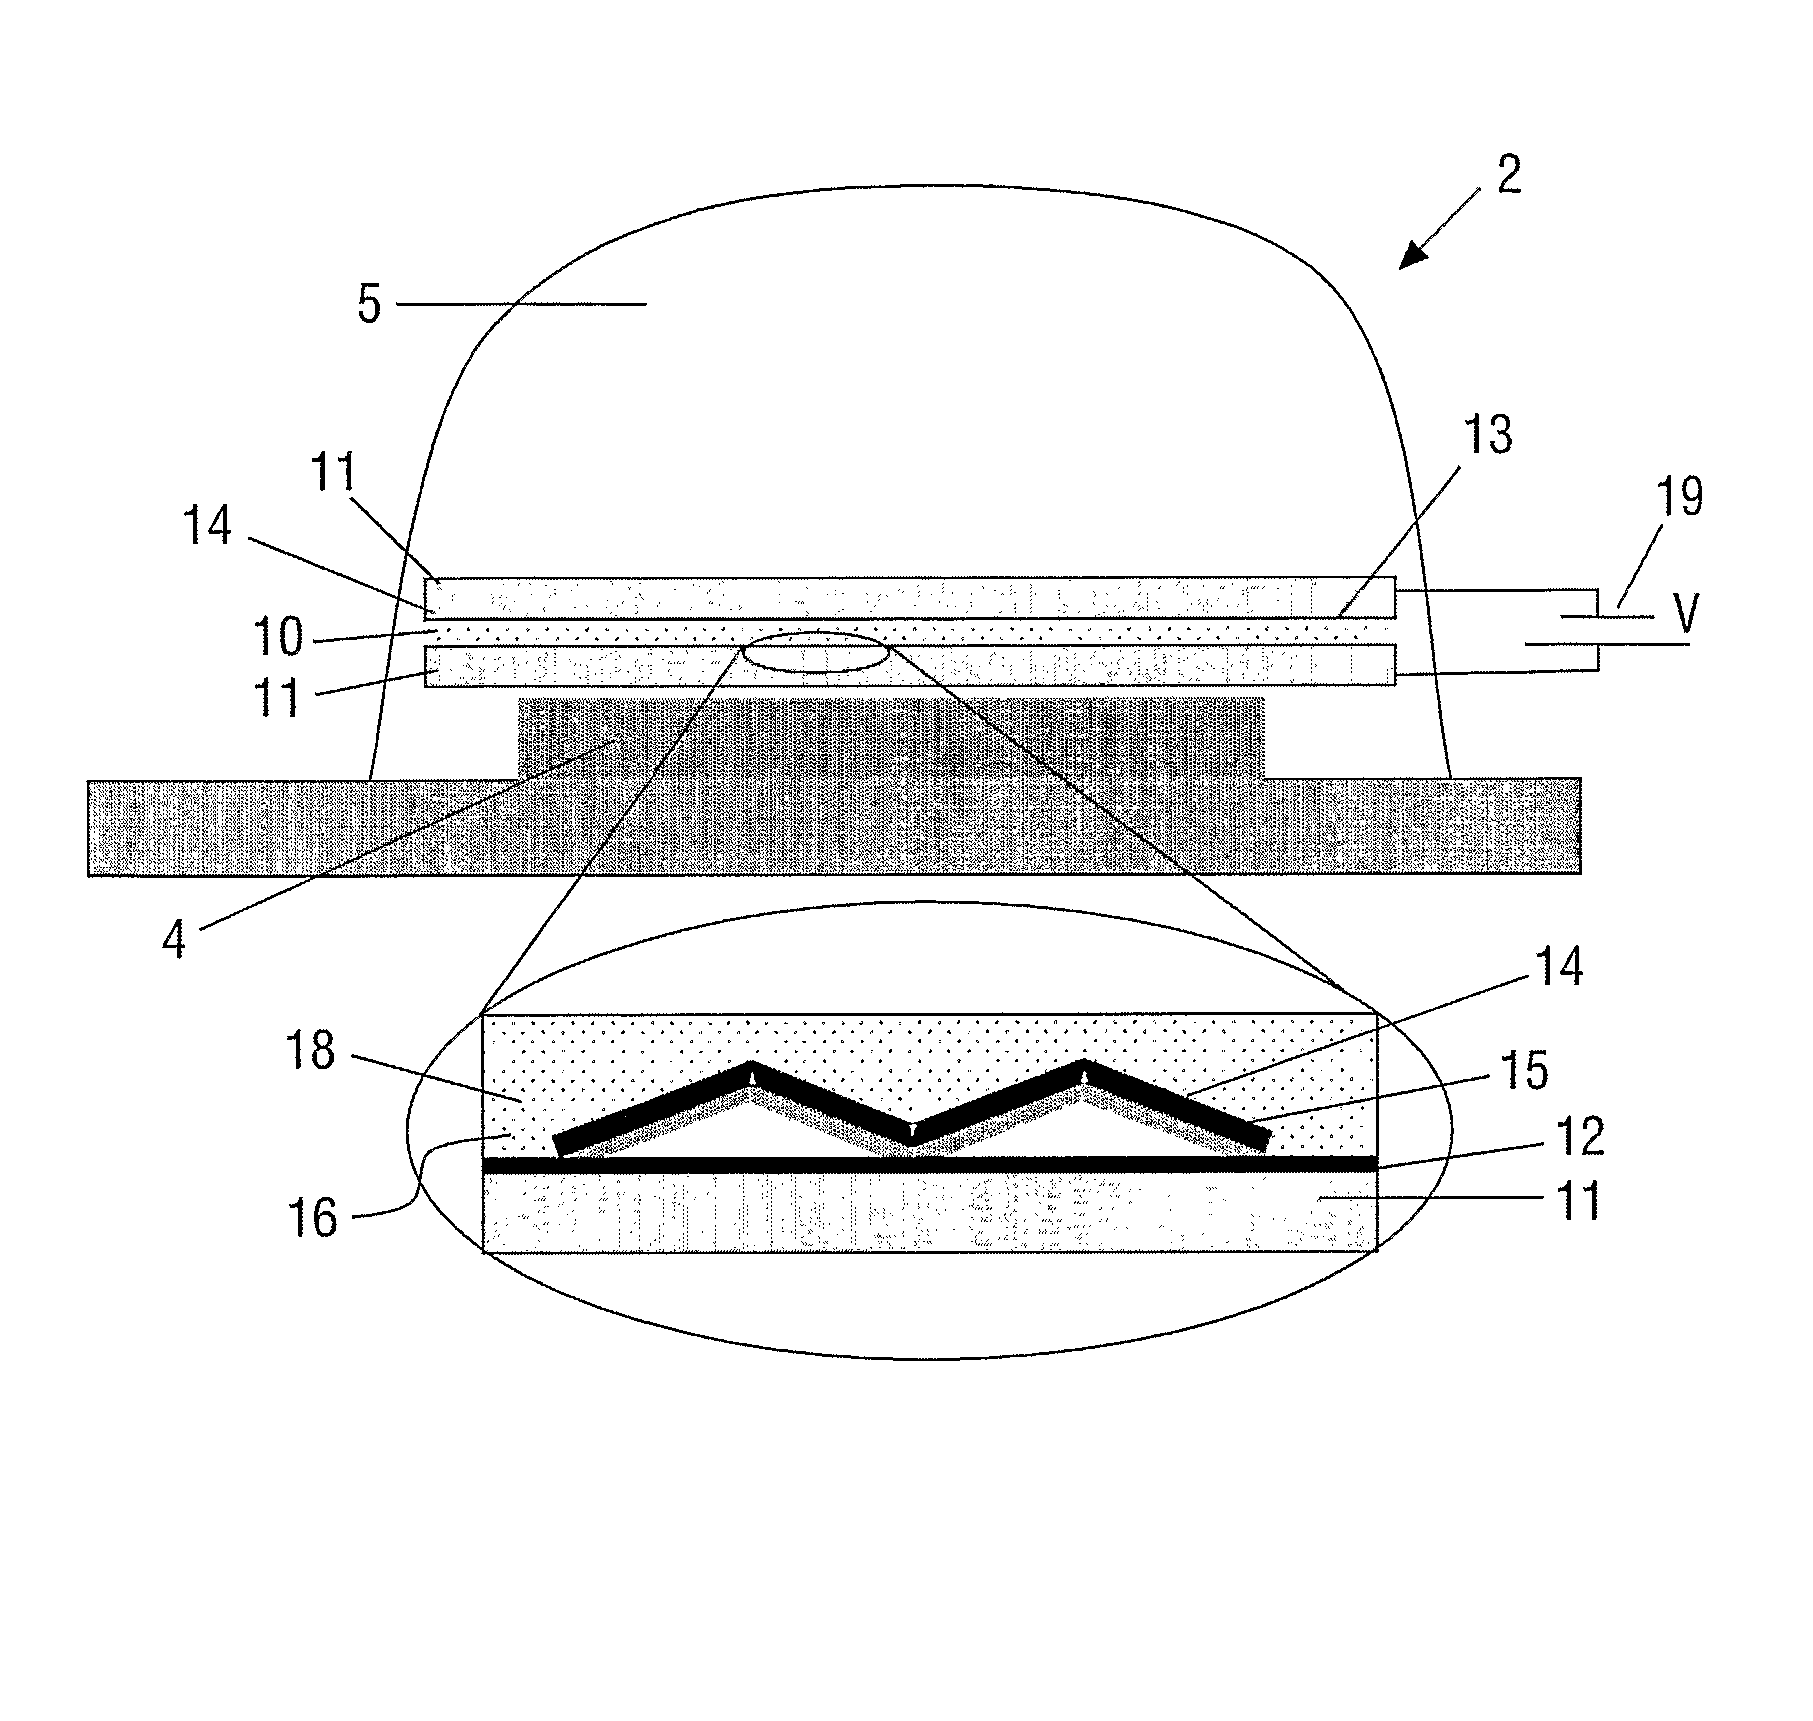 Electrically Controllable Color Conversion Cell